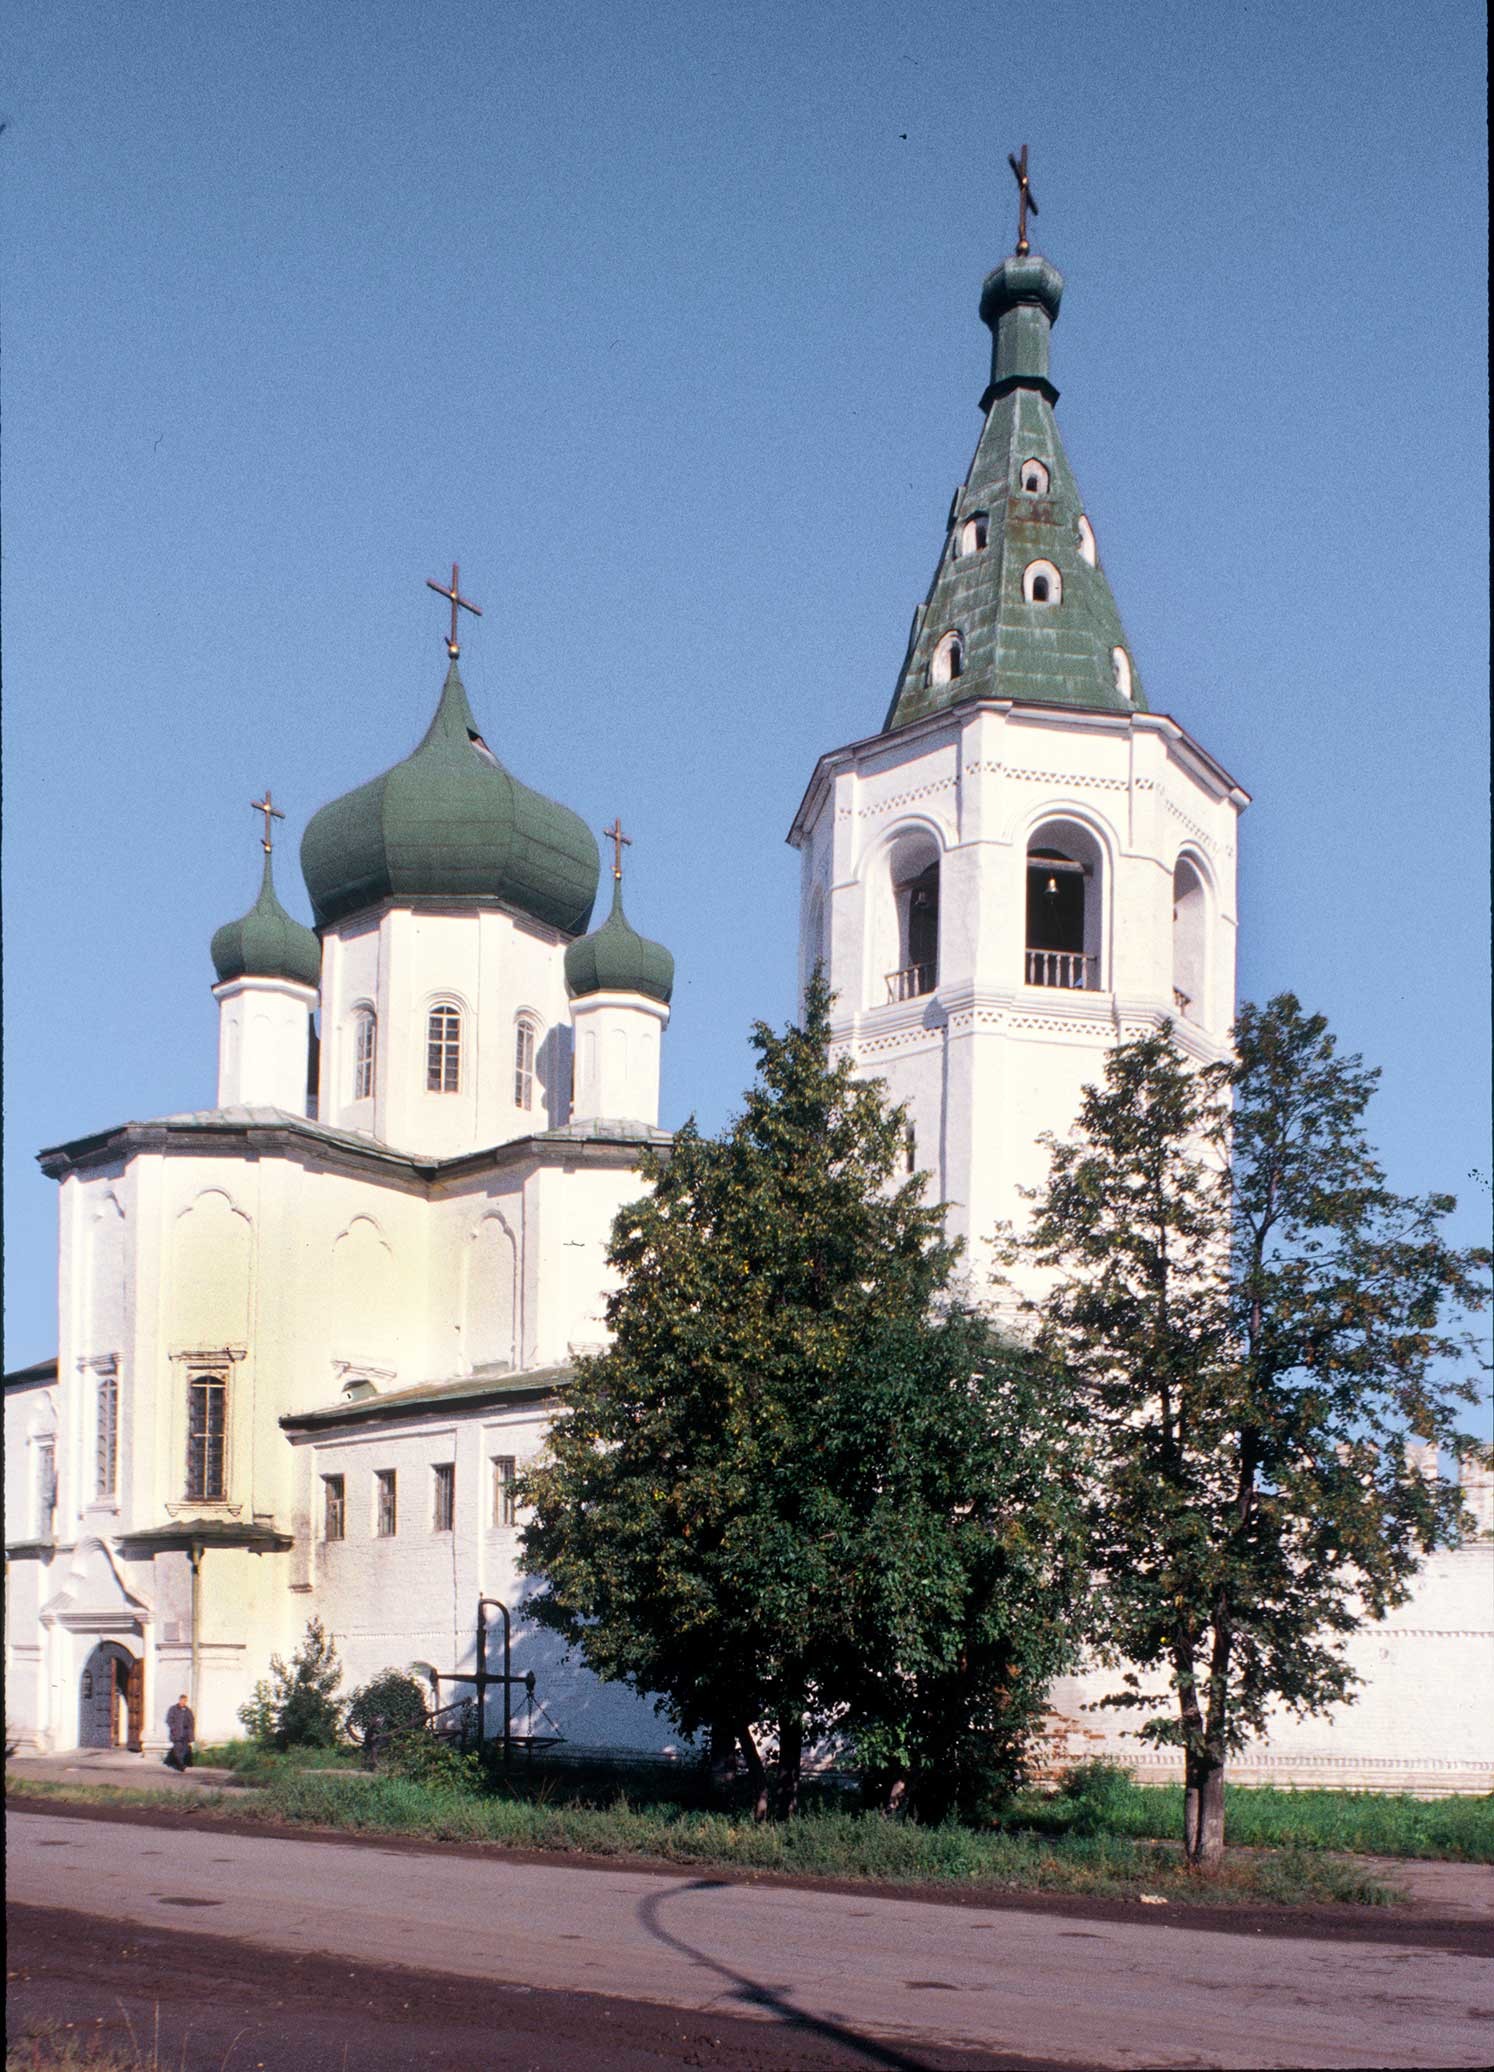 Trinity Monastery. Church of Sts. Peter and Paul&bell tower. Southeast view. Sept. 4, 1999.